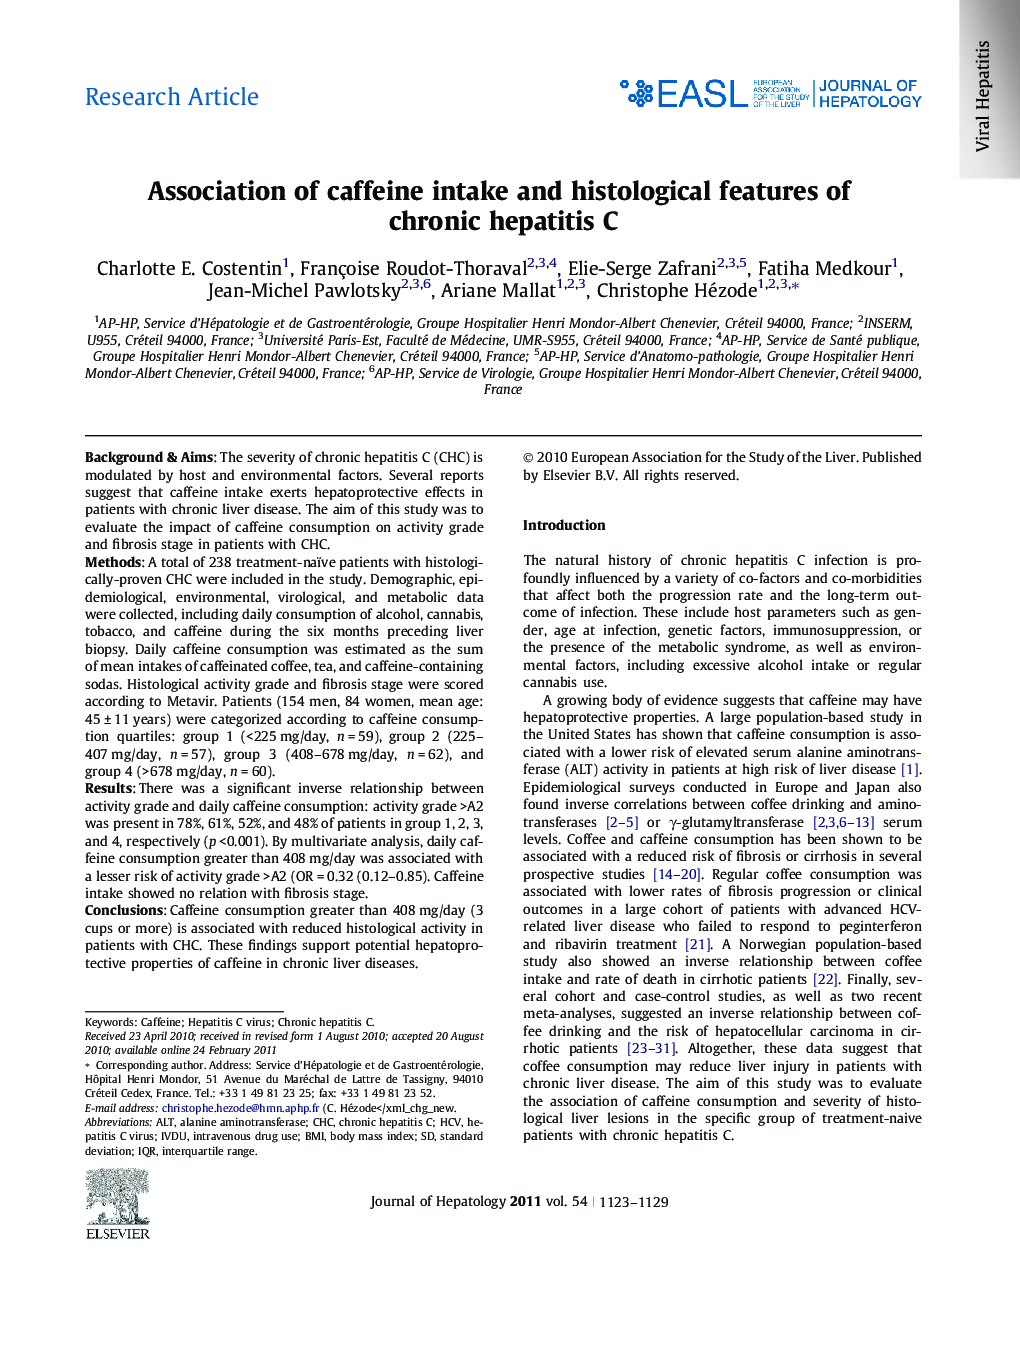 Research ArticleAssociation of caffeine intake and histological features of chronic hepatitis C